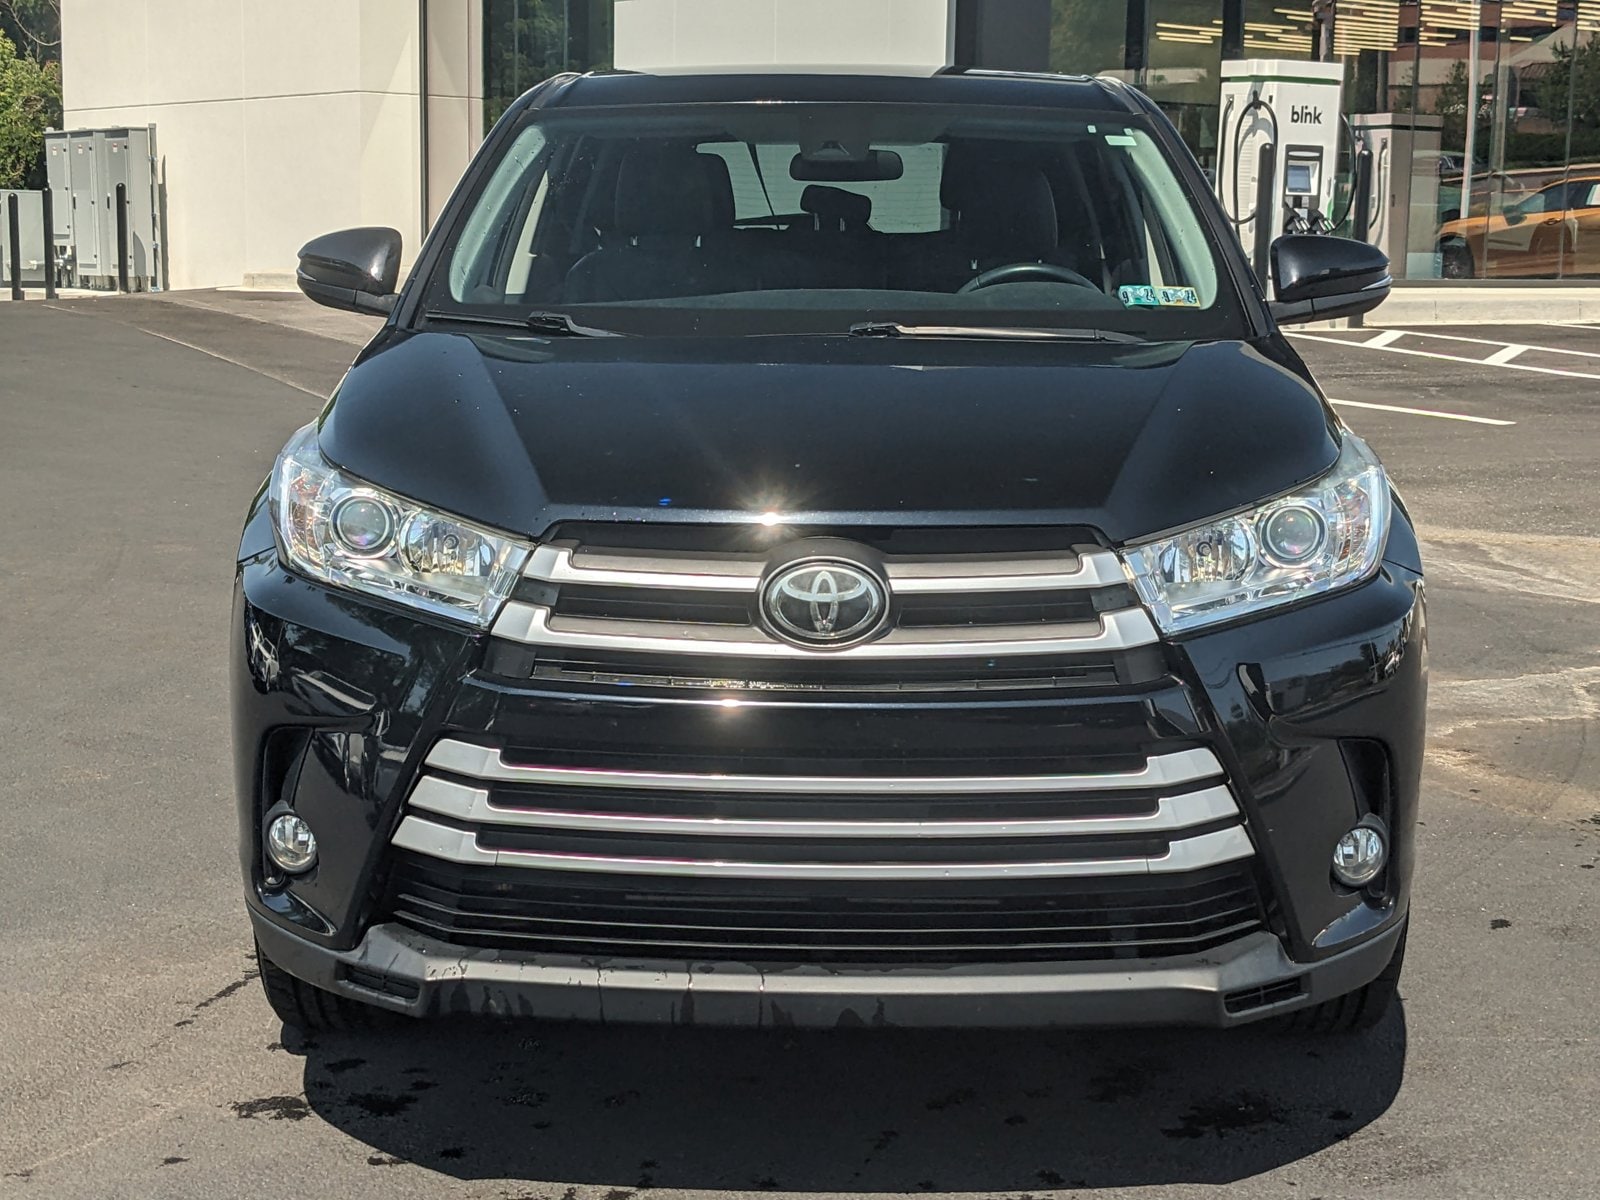 Used 2018 Toyota Highlander LE Plus with VIN 5TDBZRFH7JS909786 for sale in Cockeysville, MD